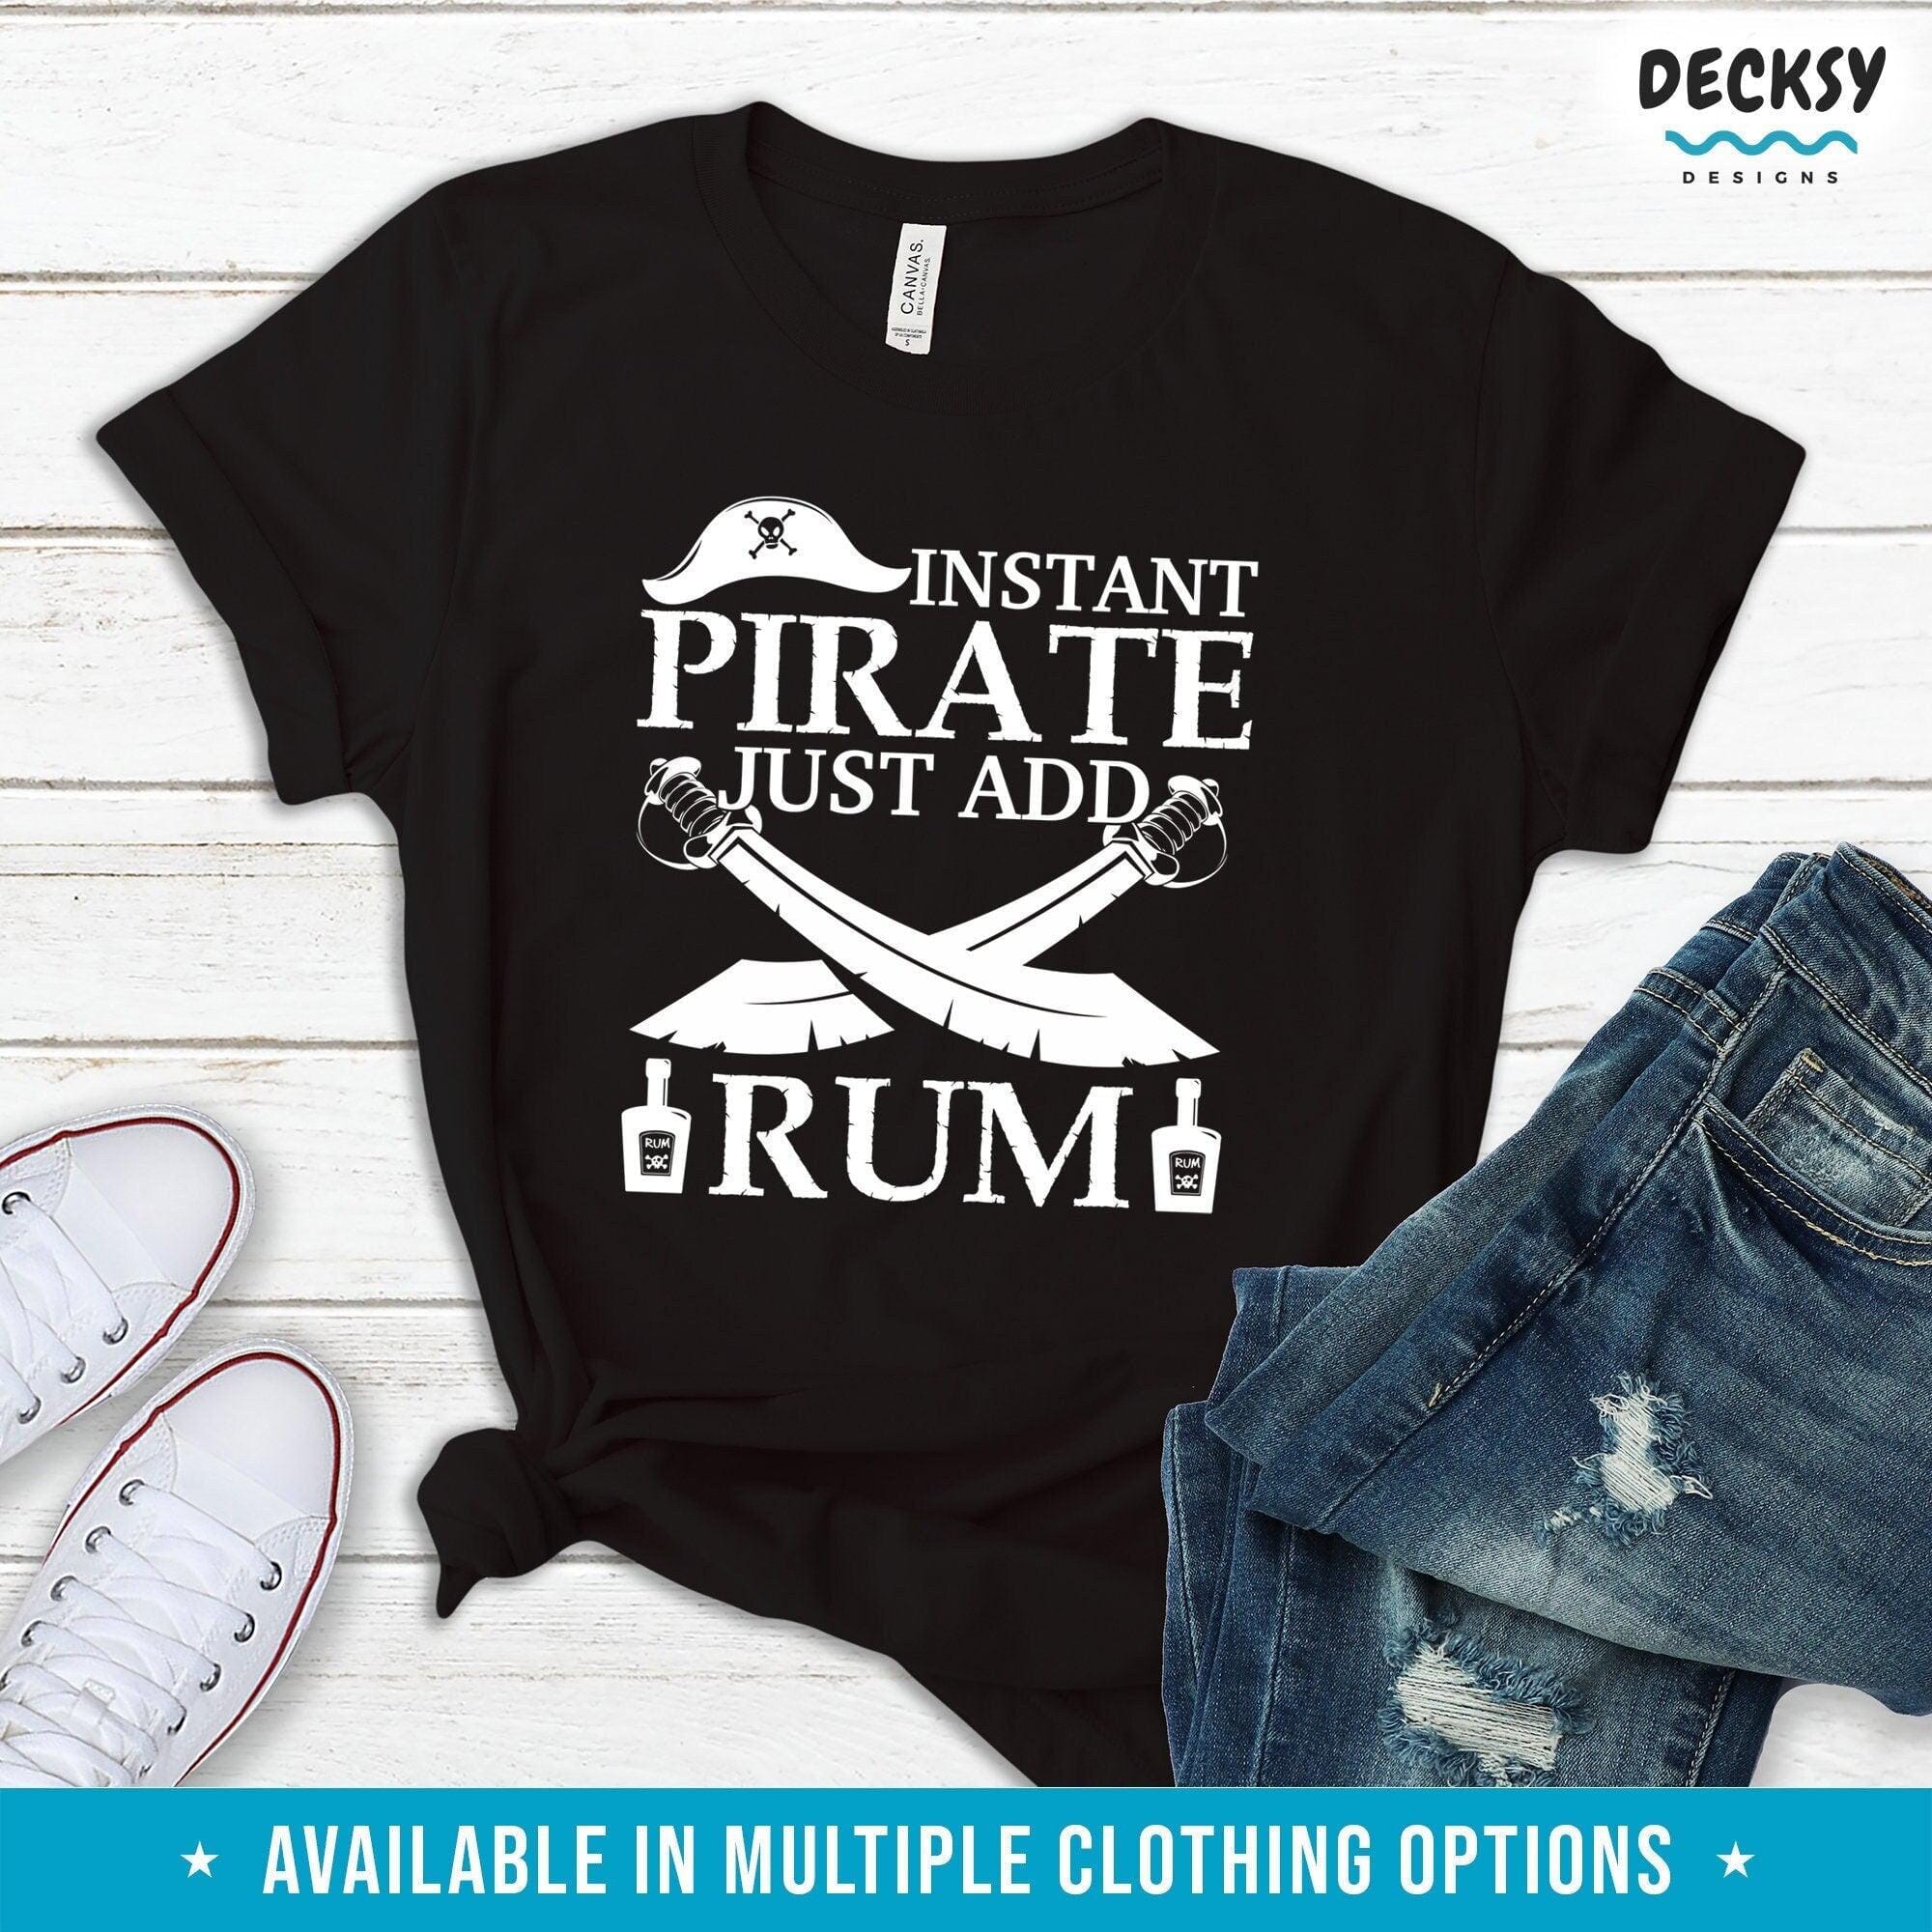 Sailing Tshirt, Cruise Holiday Gift-Clothing:Gender-Neutral Adult Clothing:Tops & Tees:T-shirts:Graphic Tees-DecksyDesigns